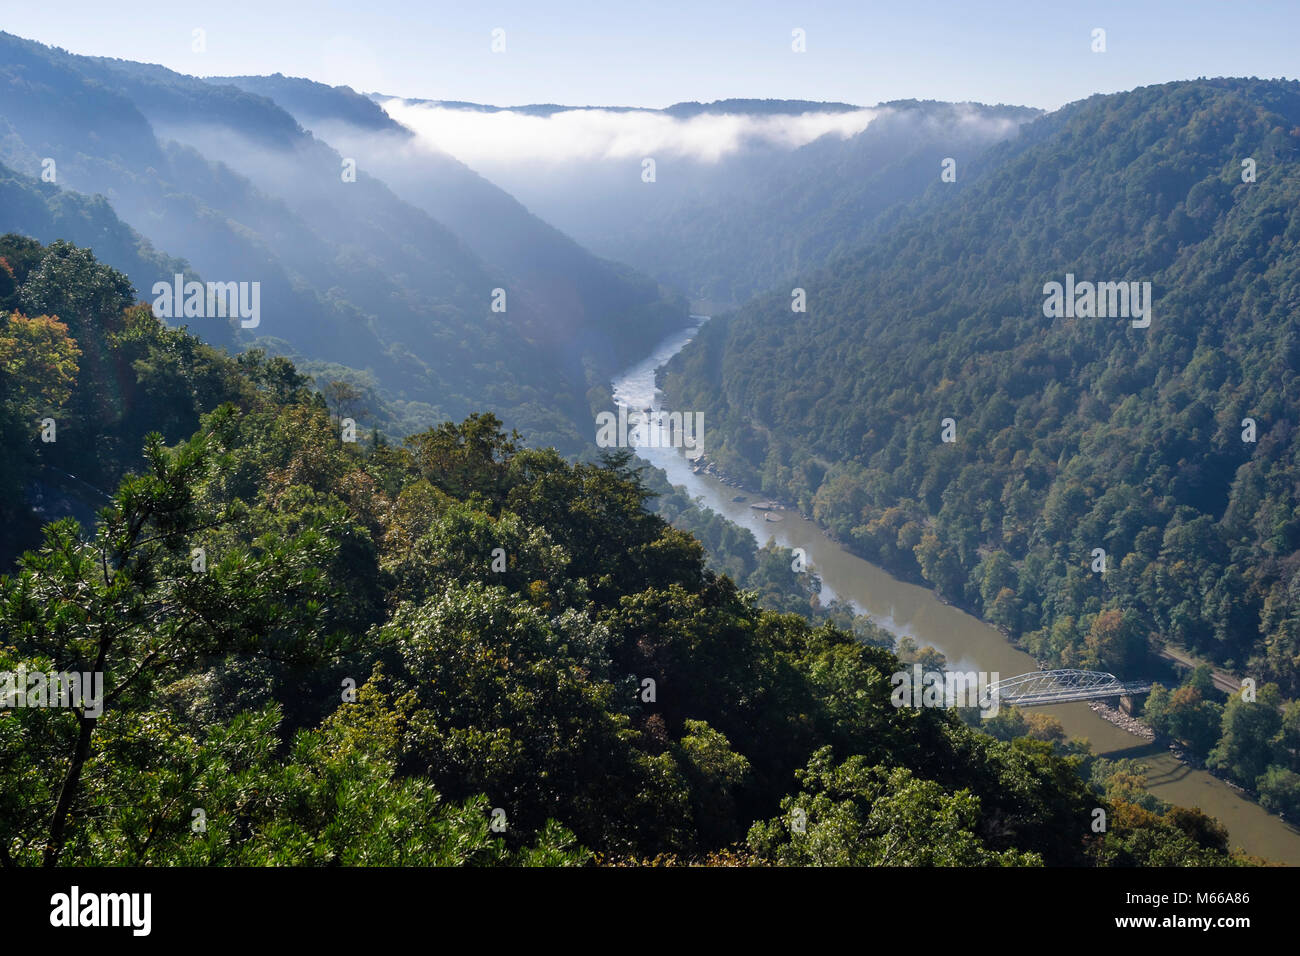 West Virginia,Appalachia Fayette County,Fayetteville,New River Gorge National River,water,tributary,Appalachian Mountains,morning fog,view from Canyon Stock Photo